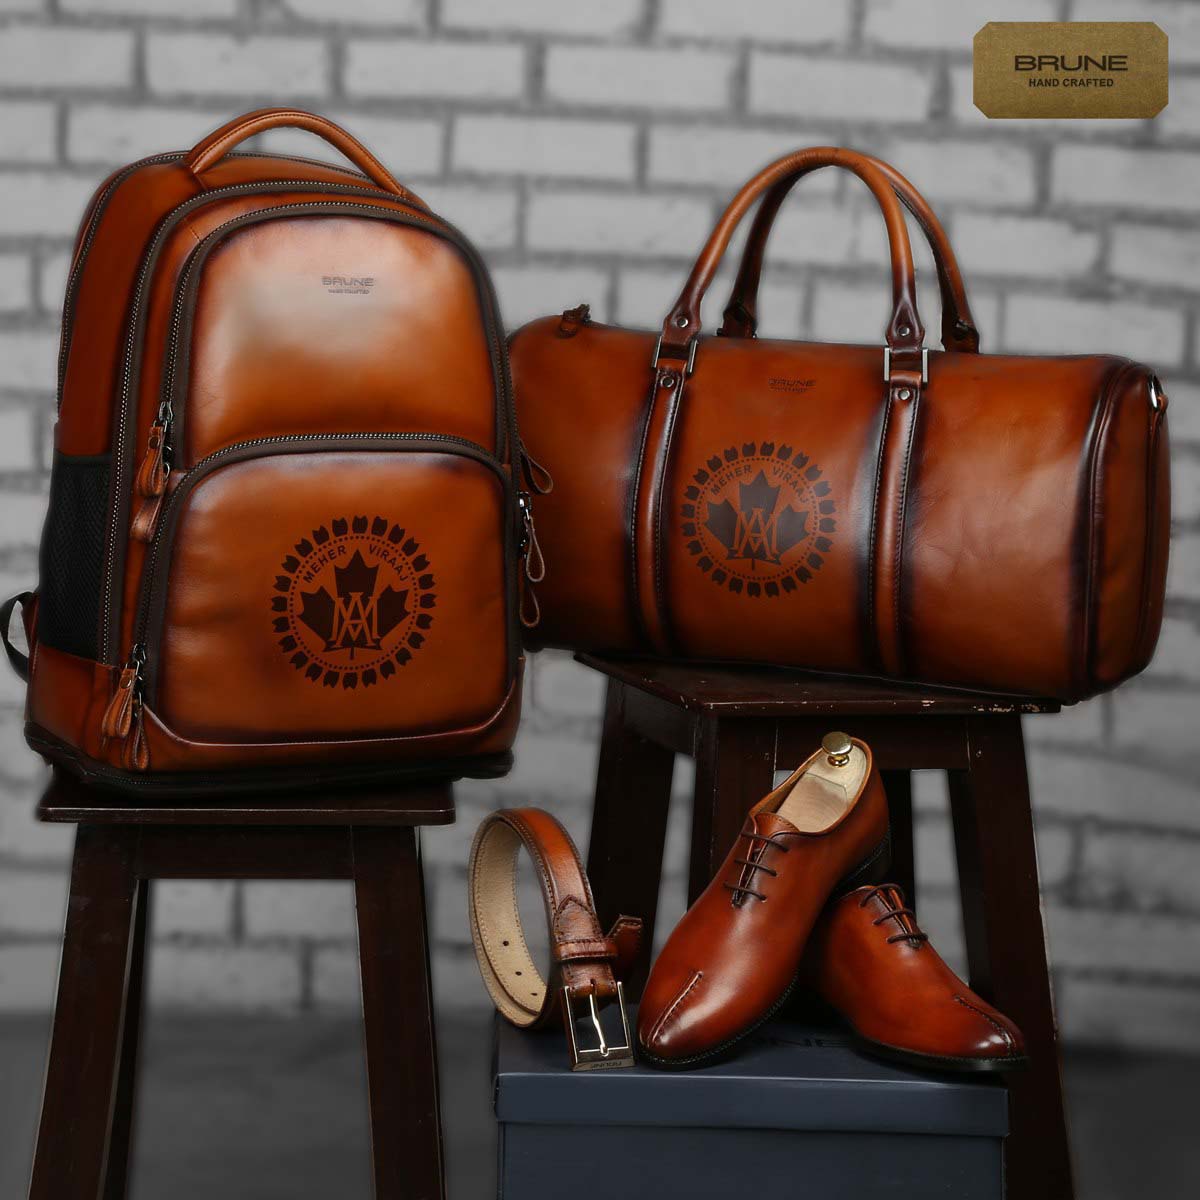 Tailored 4 pc combo of Shoe, Backpack, Belt & Duffle with desired logo By Brune & Bareskin